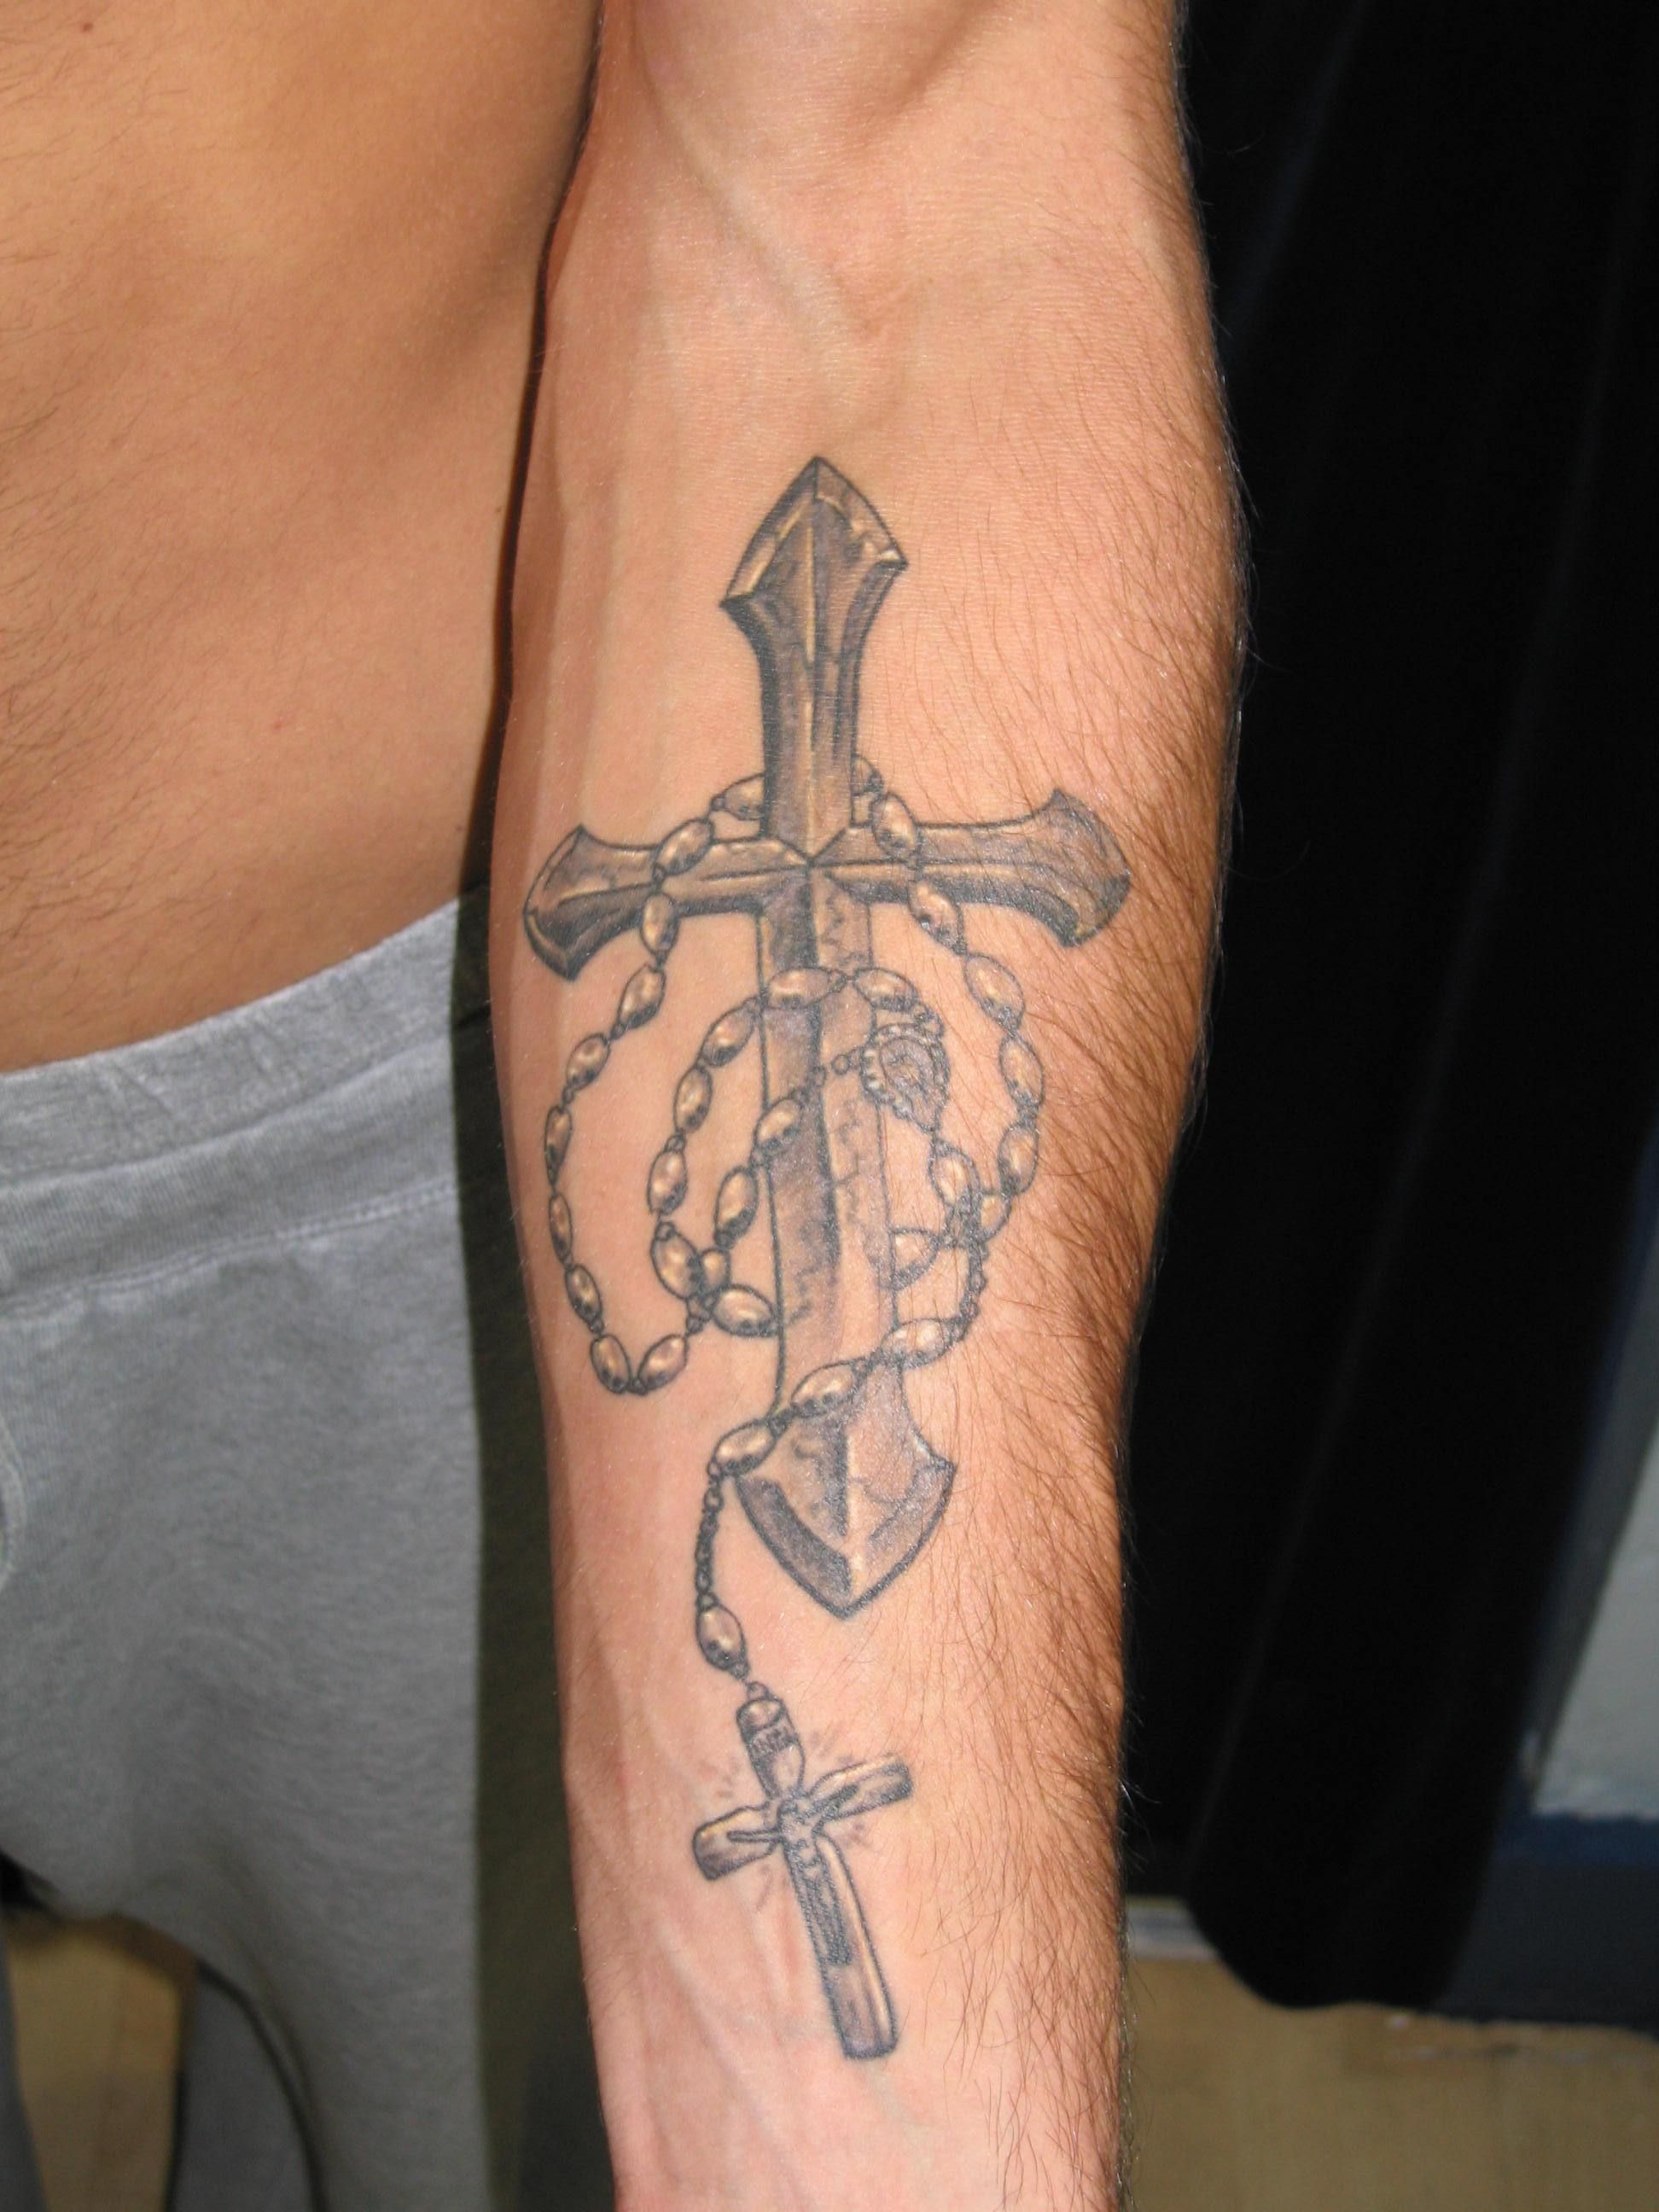 20 Cross Tattoos Design Ideas For Men And Women Vegasink1 Cross within sizing 1944 X 2592